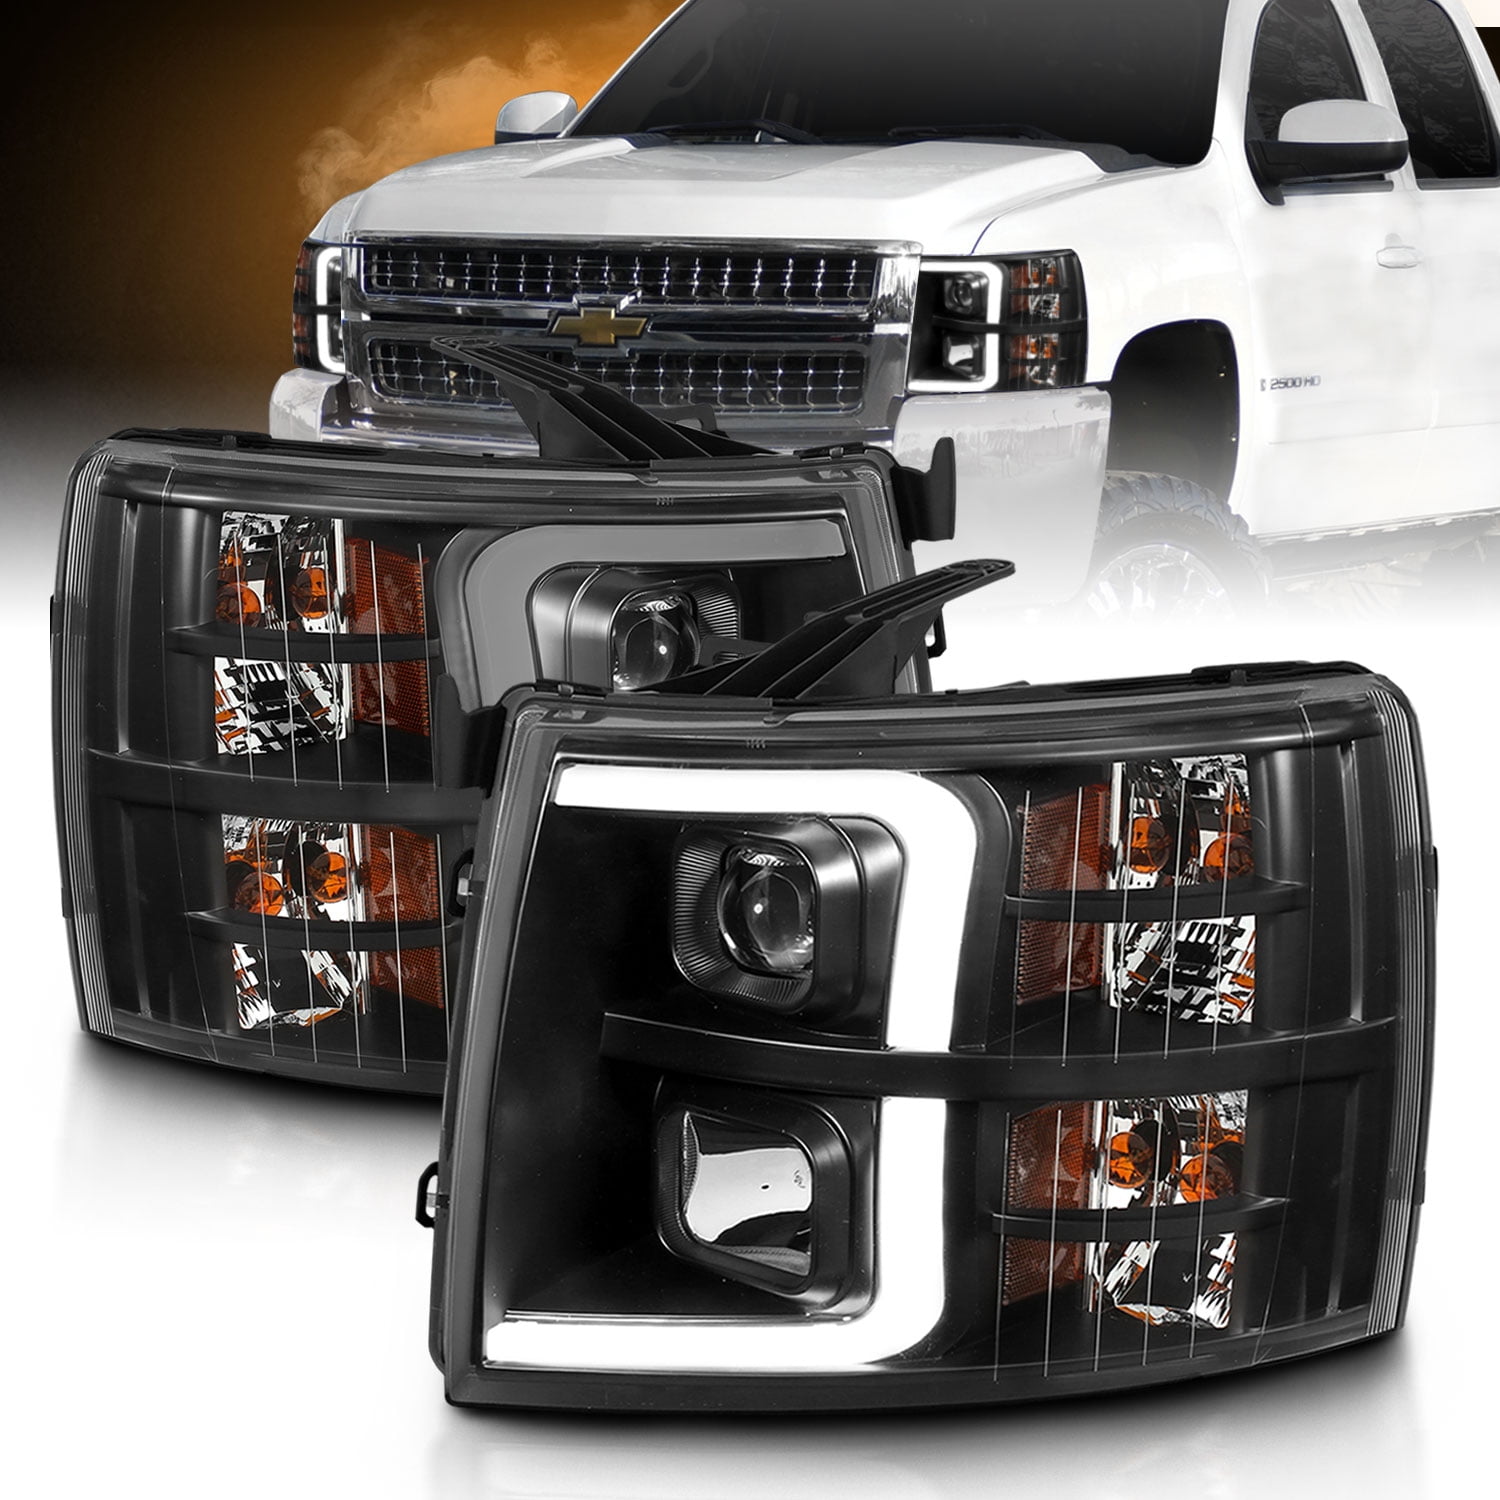 ACANII For 2007-2013 Chevy Silverado 1500 2500HD 3500HD Pickup Truck Tail Lights Lamps Assembly Driver & Passenger 